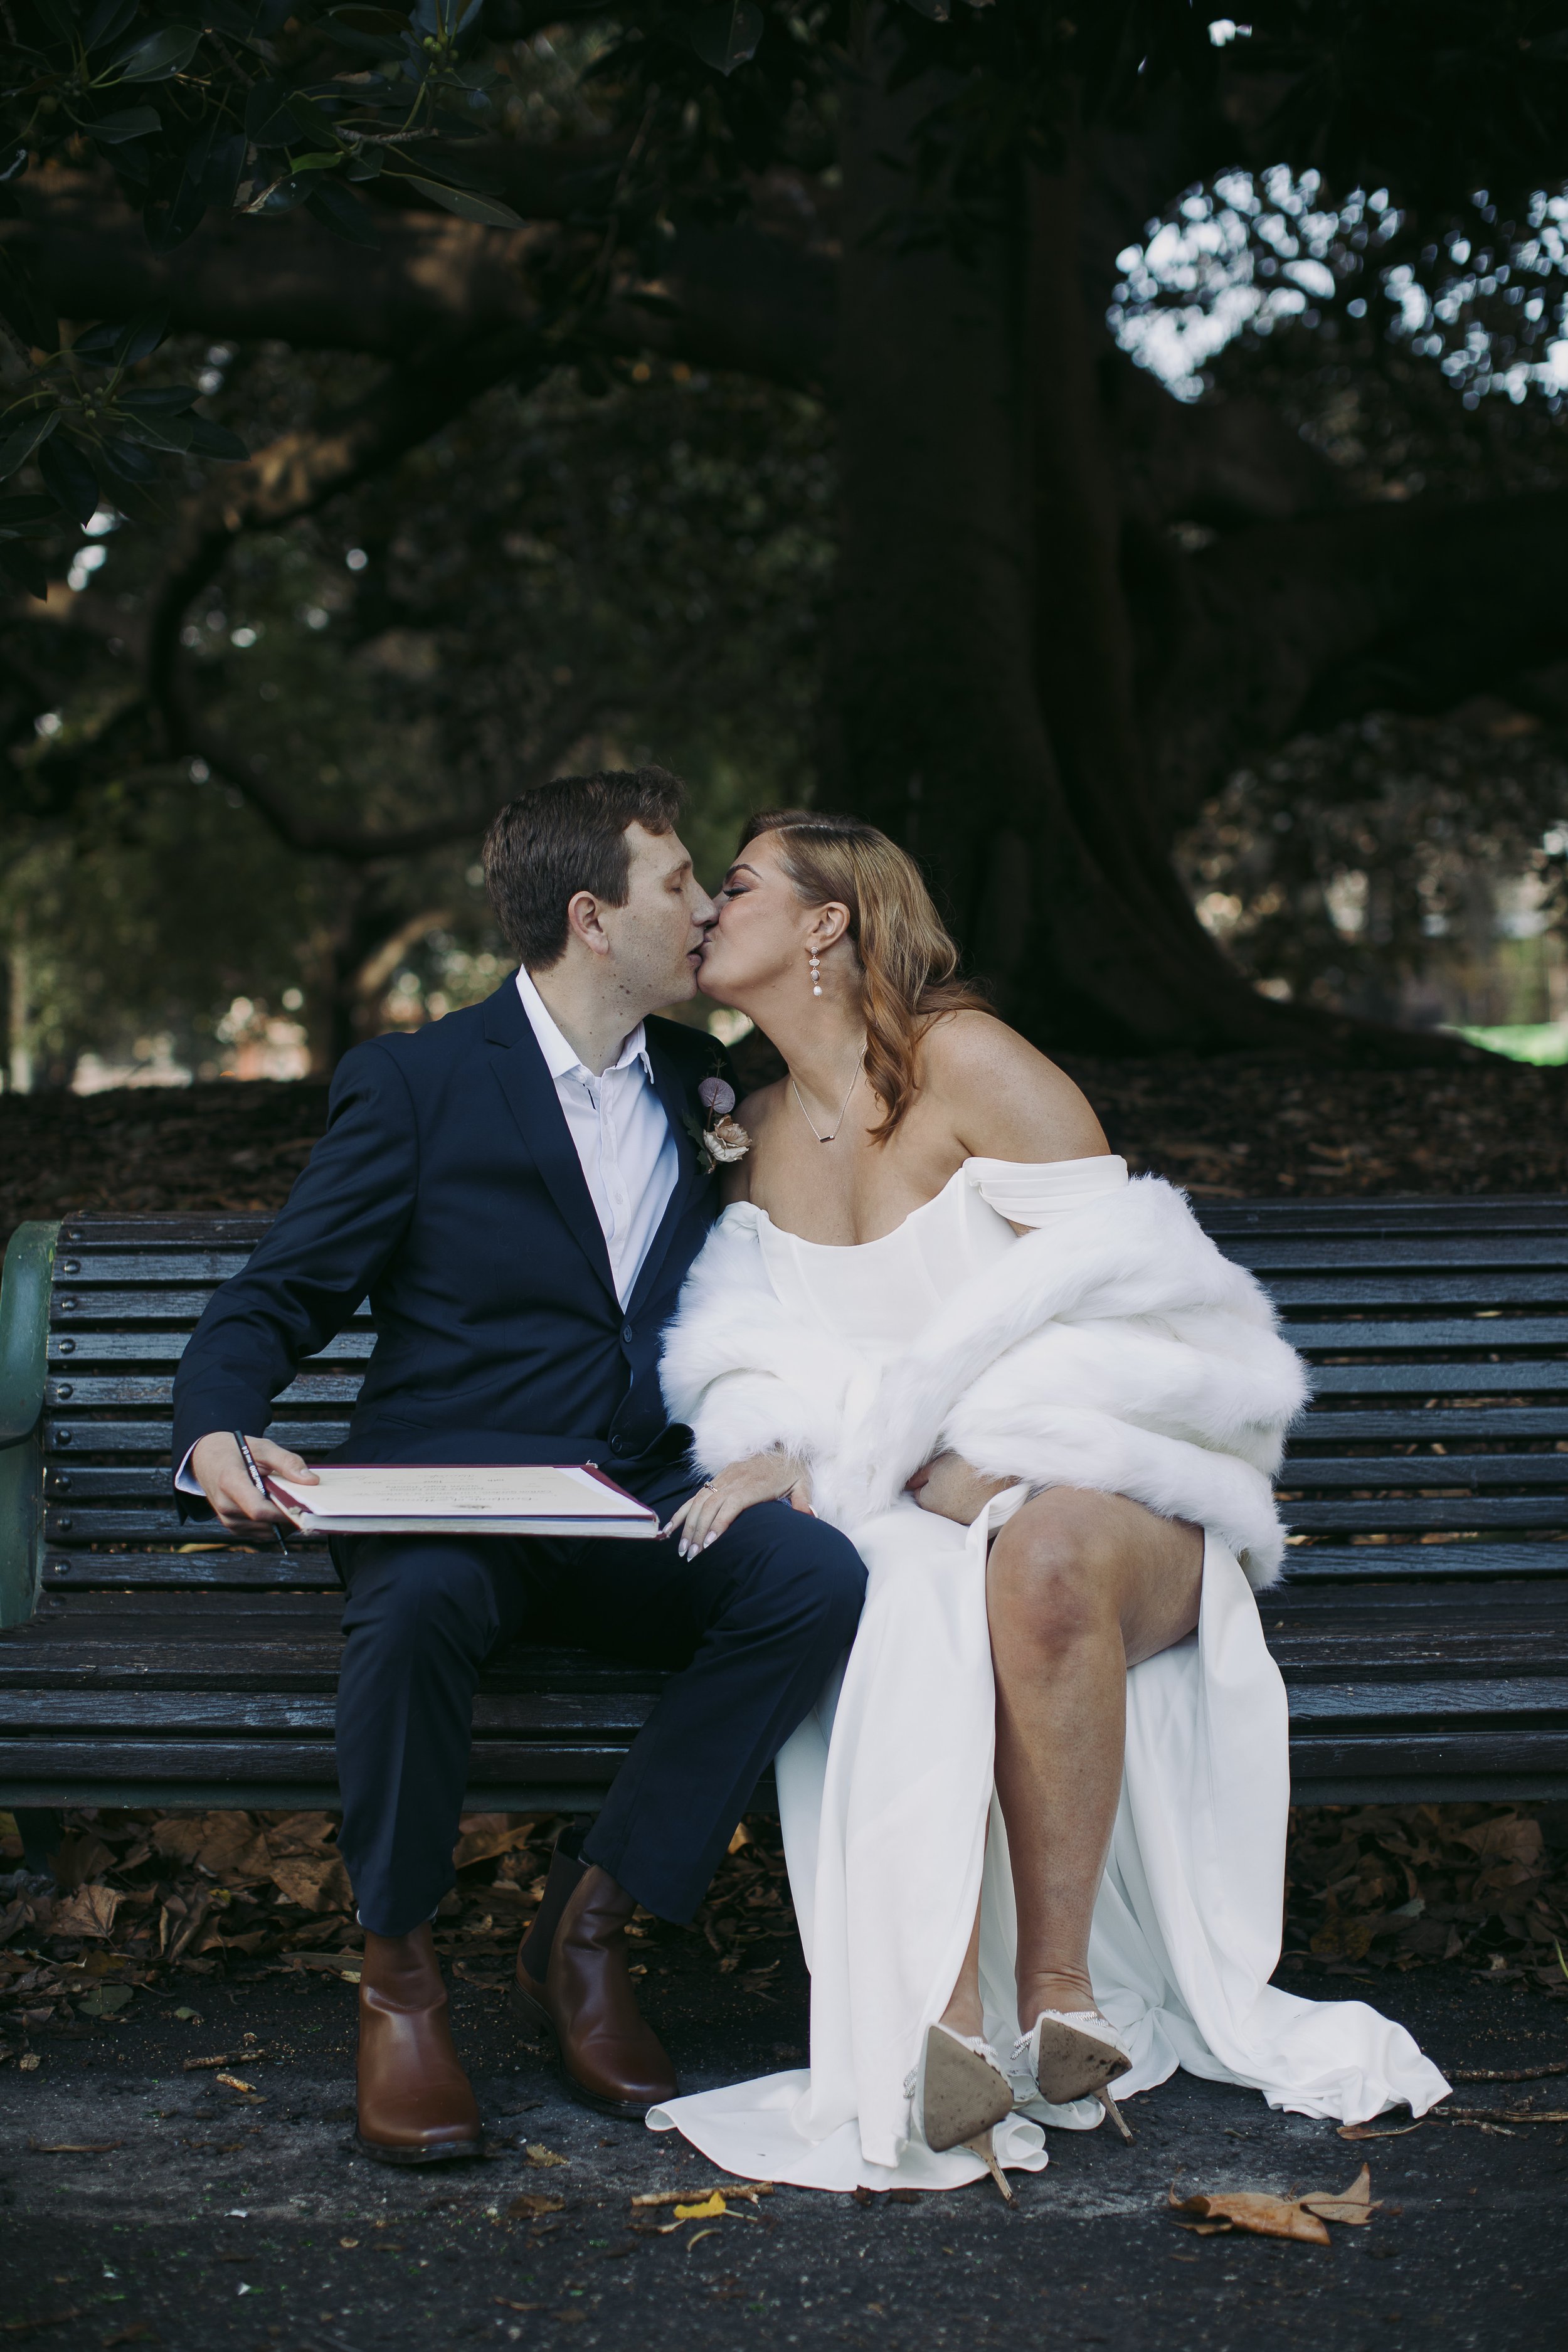 Elopement package in Hobart thats affordable